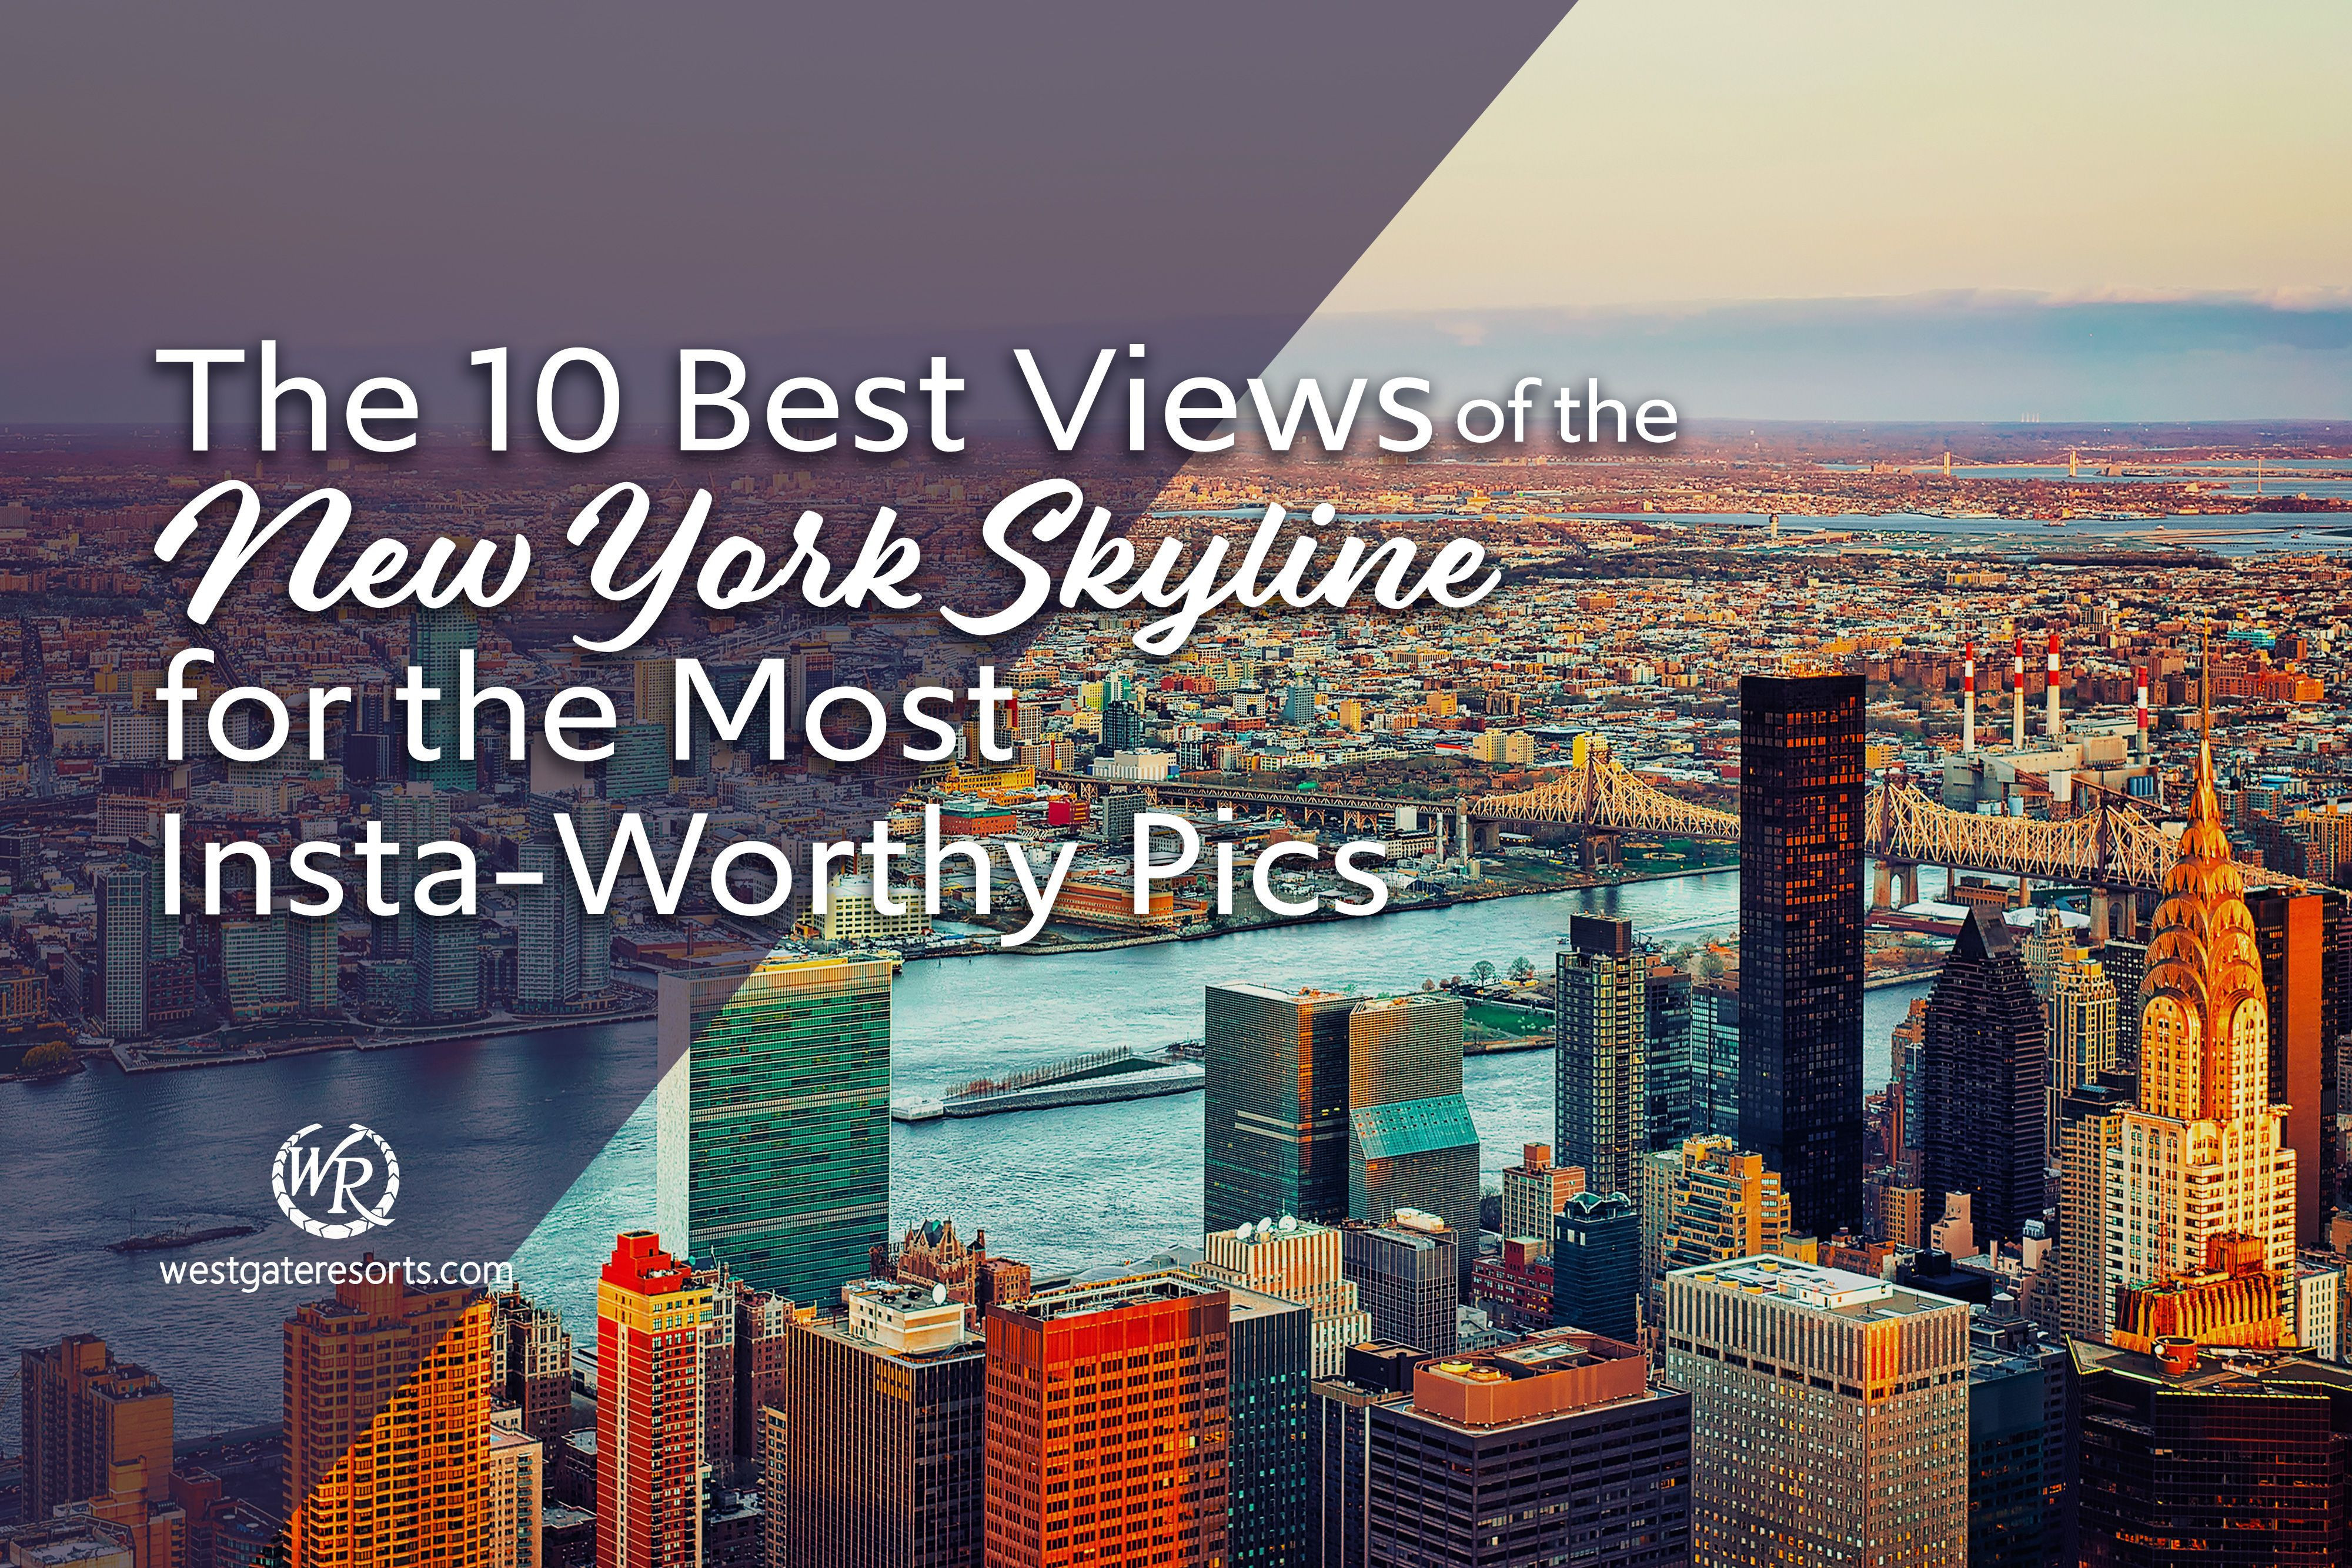 The 10 Best Views of the New York Skyline for the Most Insta-Worthy Pics!